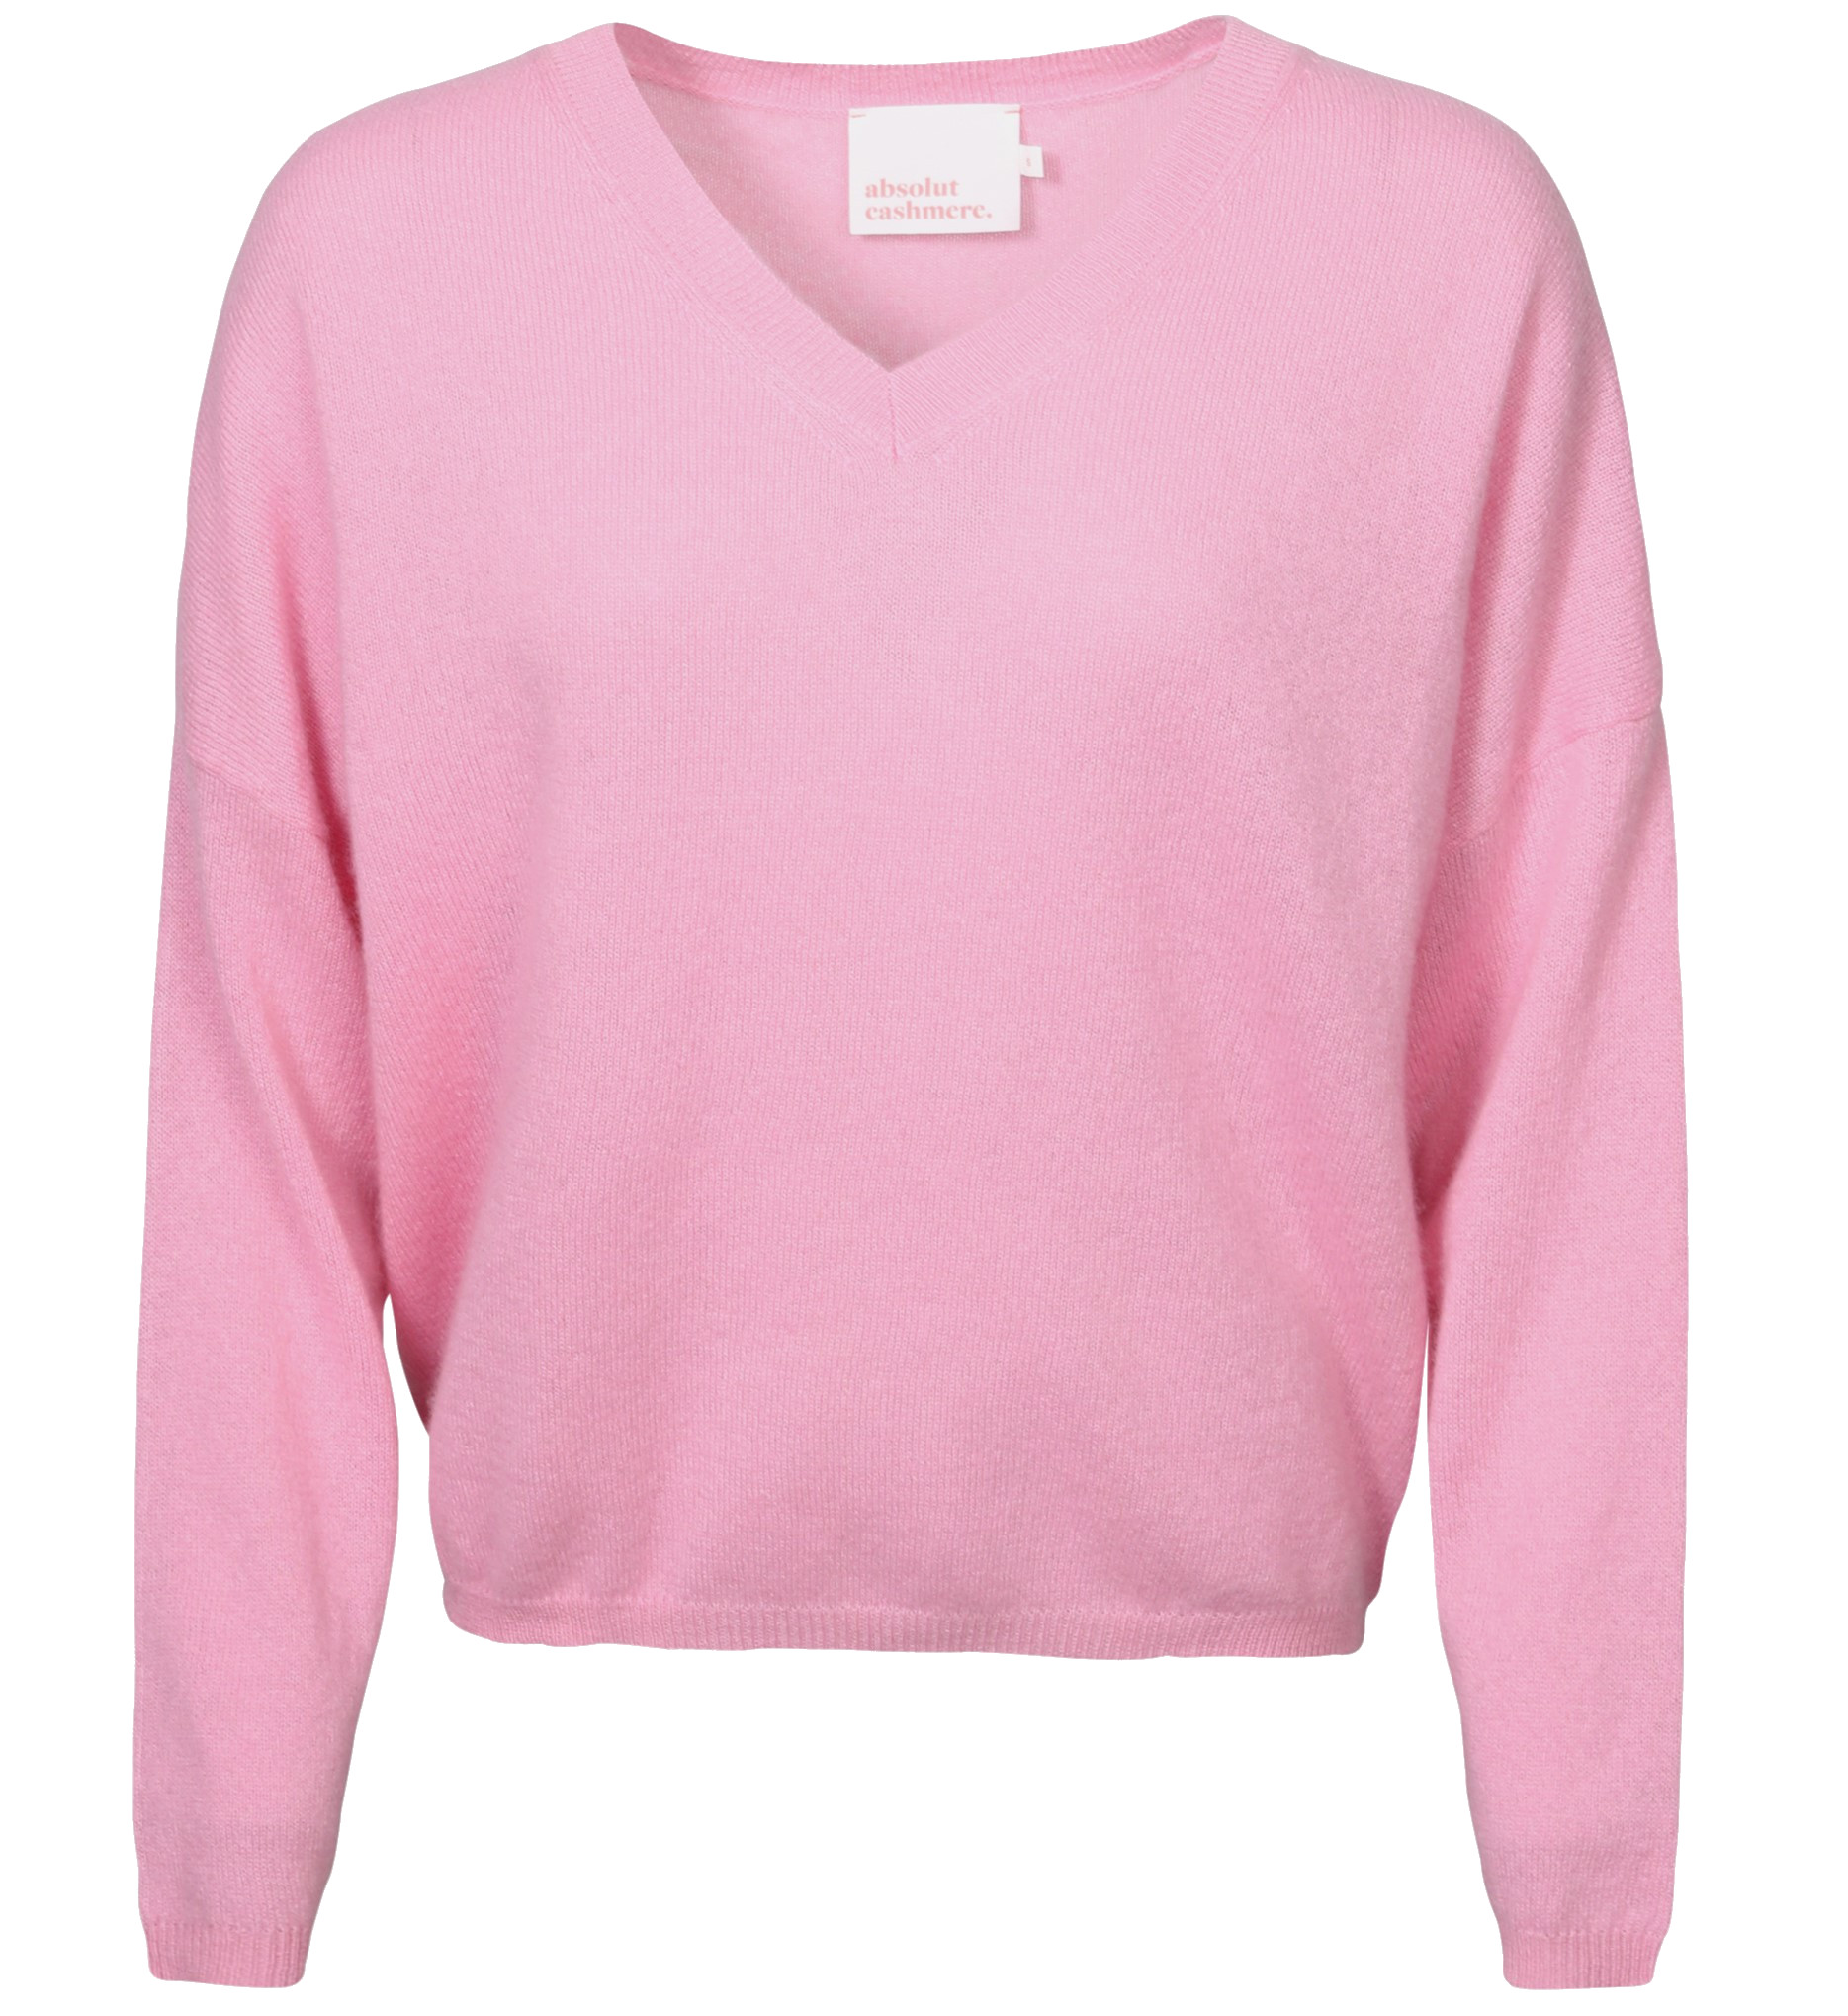 ABSOLUT CASHMERE V-Neck Sweater Alicia in Light Pink